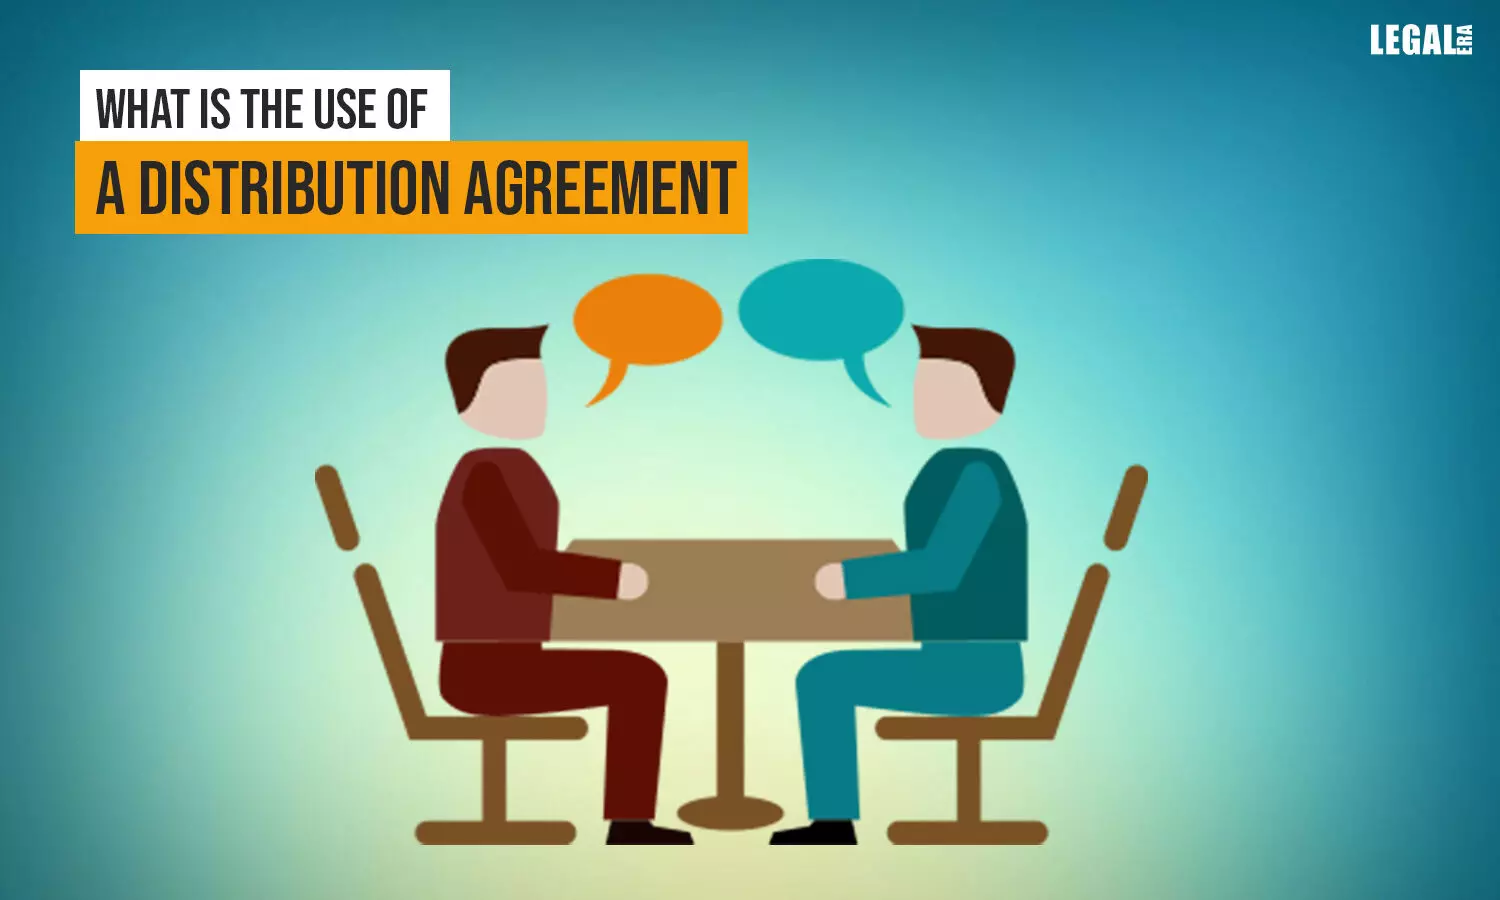 What is The Use of a Distribution Agreement